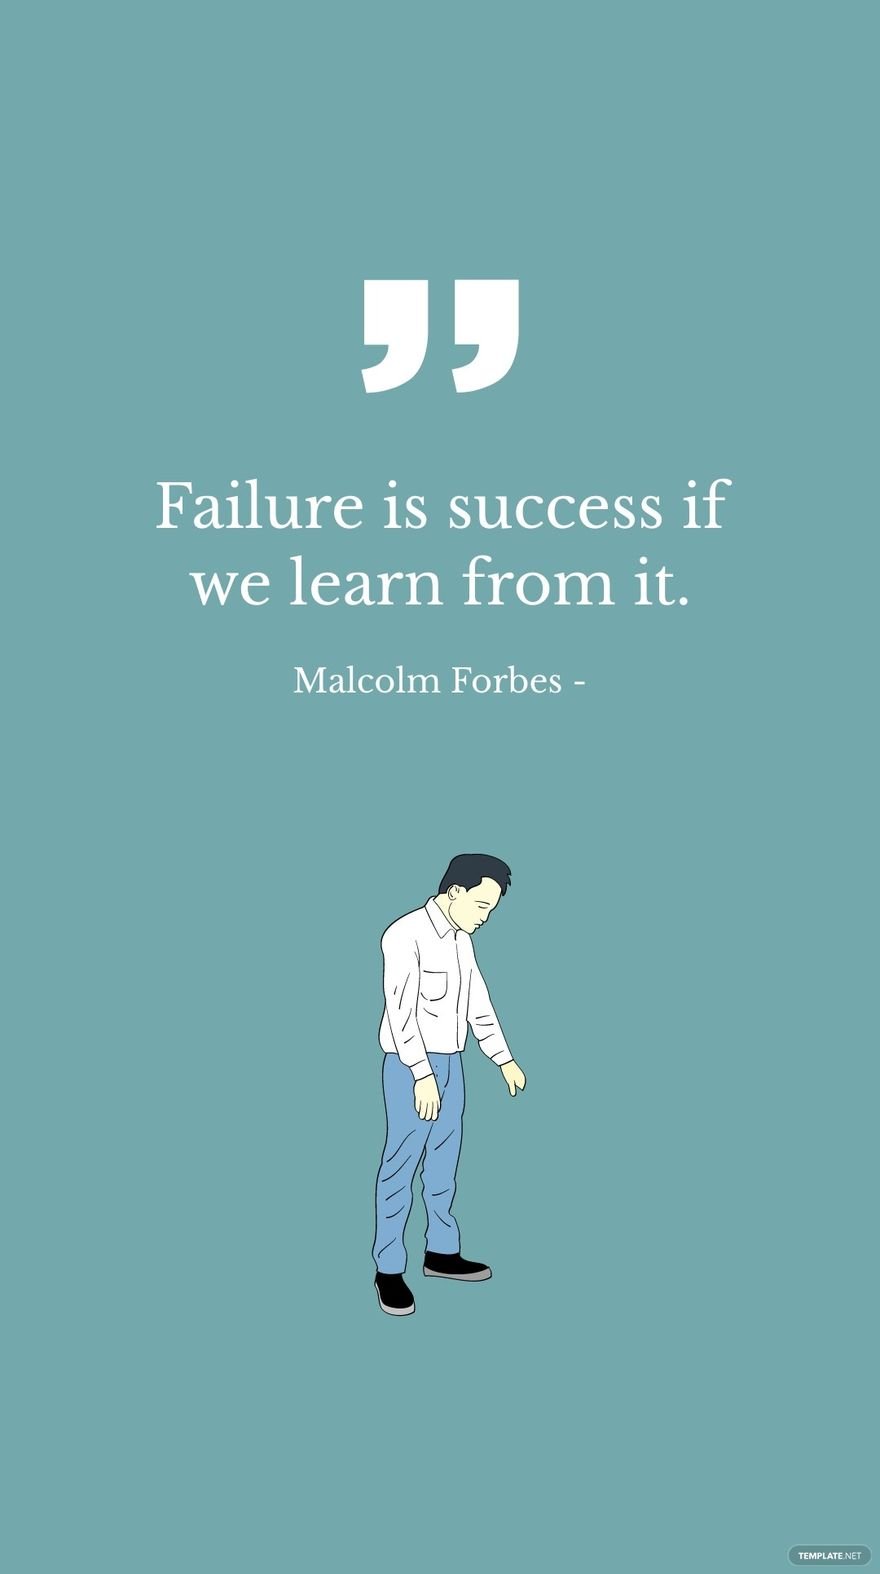 Malcolm Forbes - Failure is success if we learn from it.